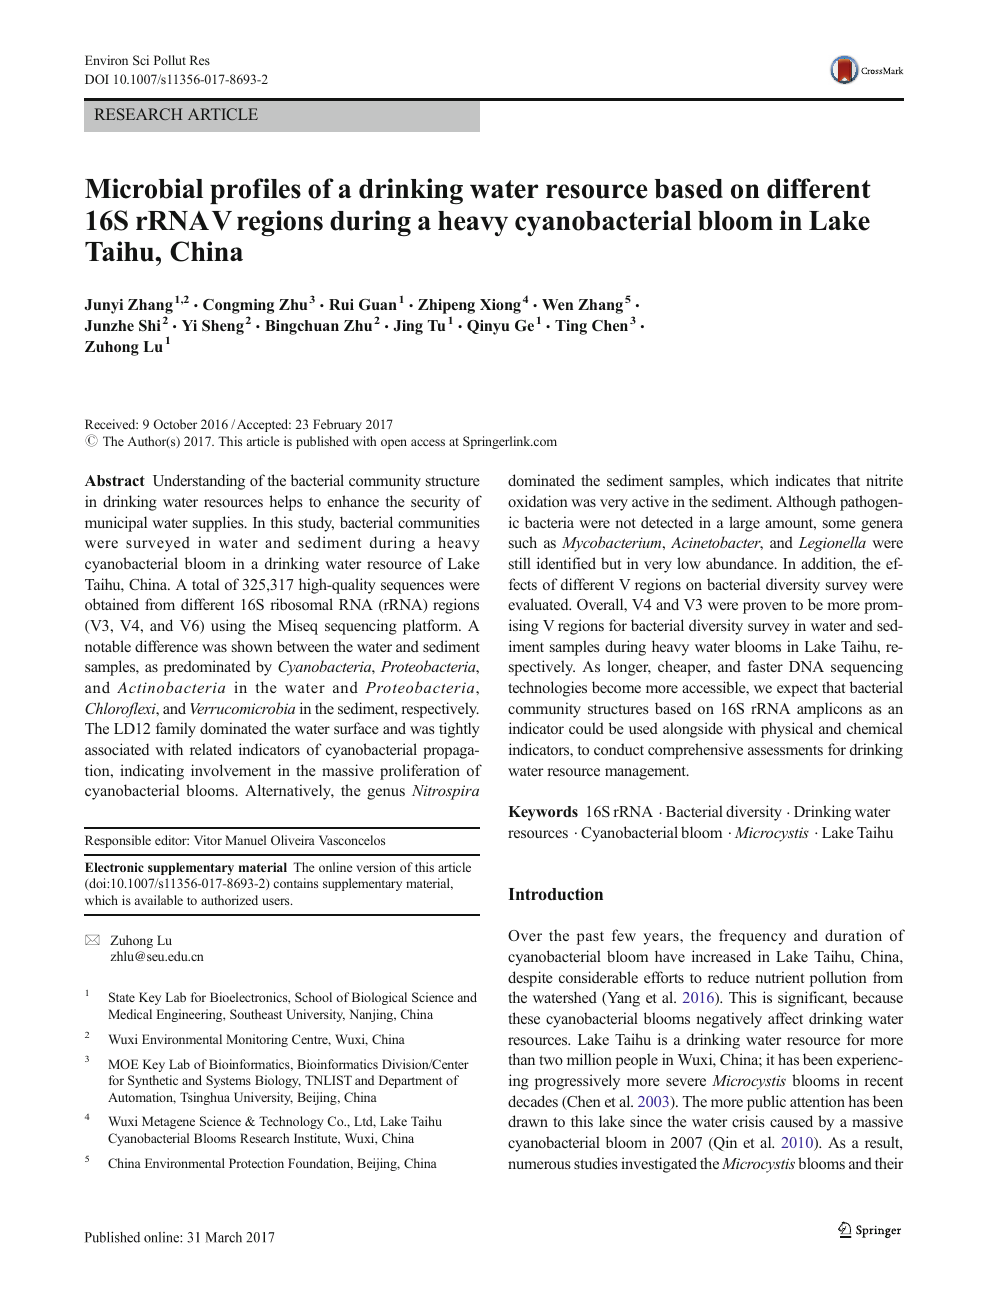 Microbial profiles of a drinking water resource based on different 